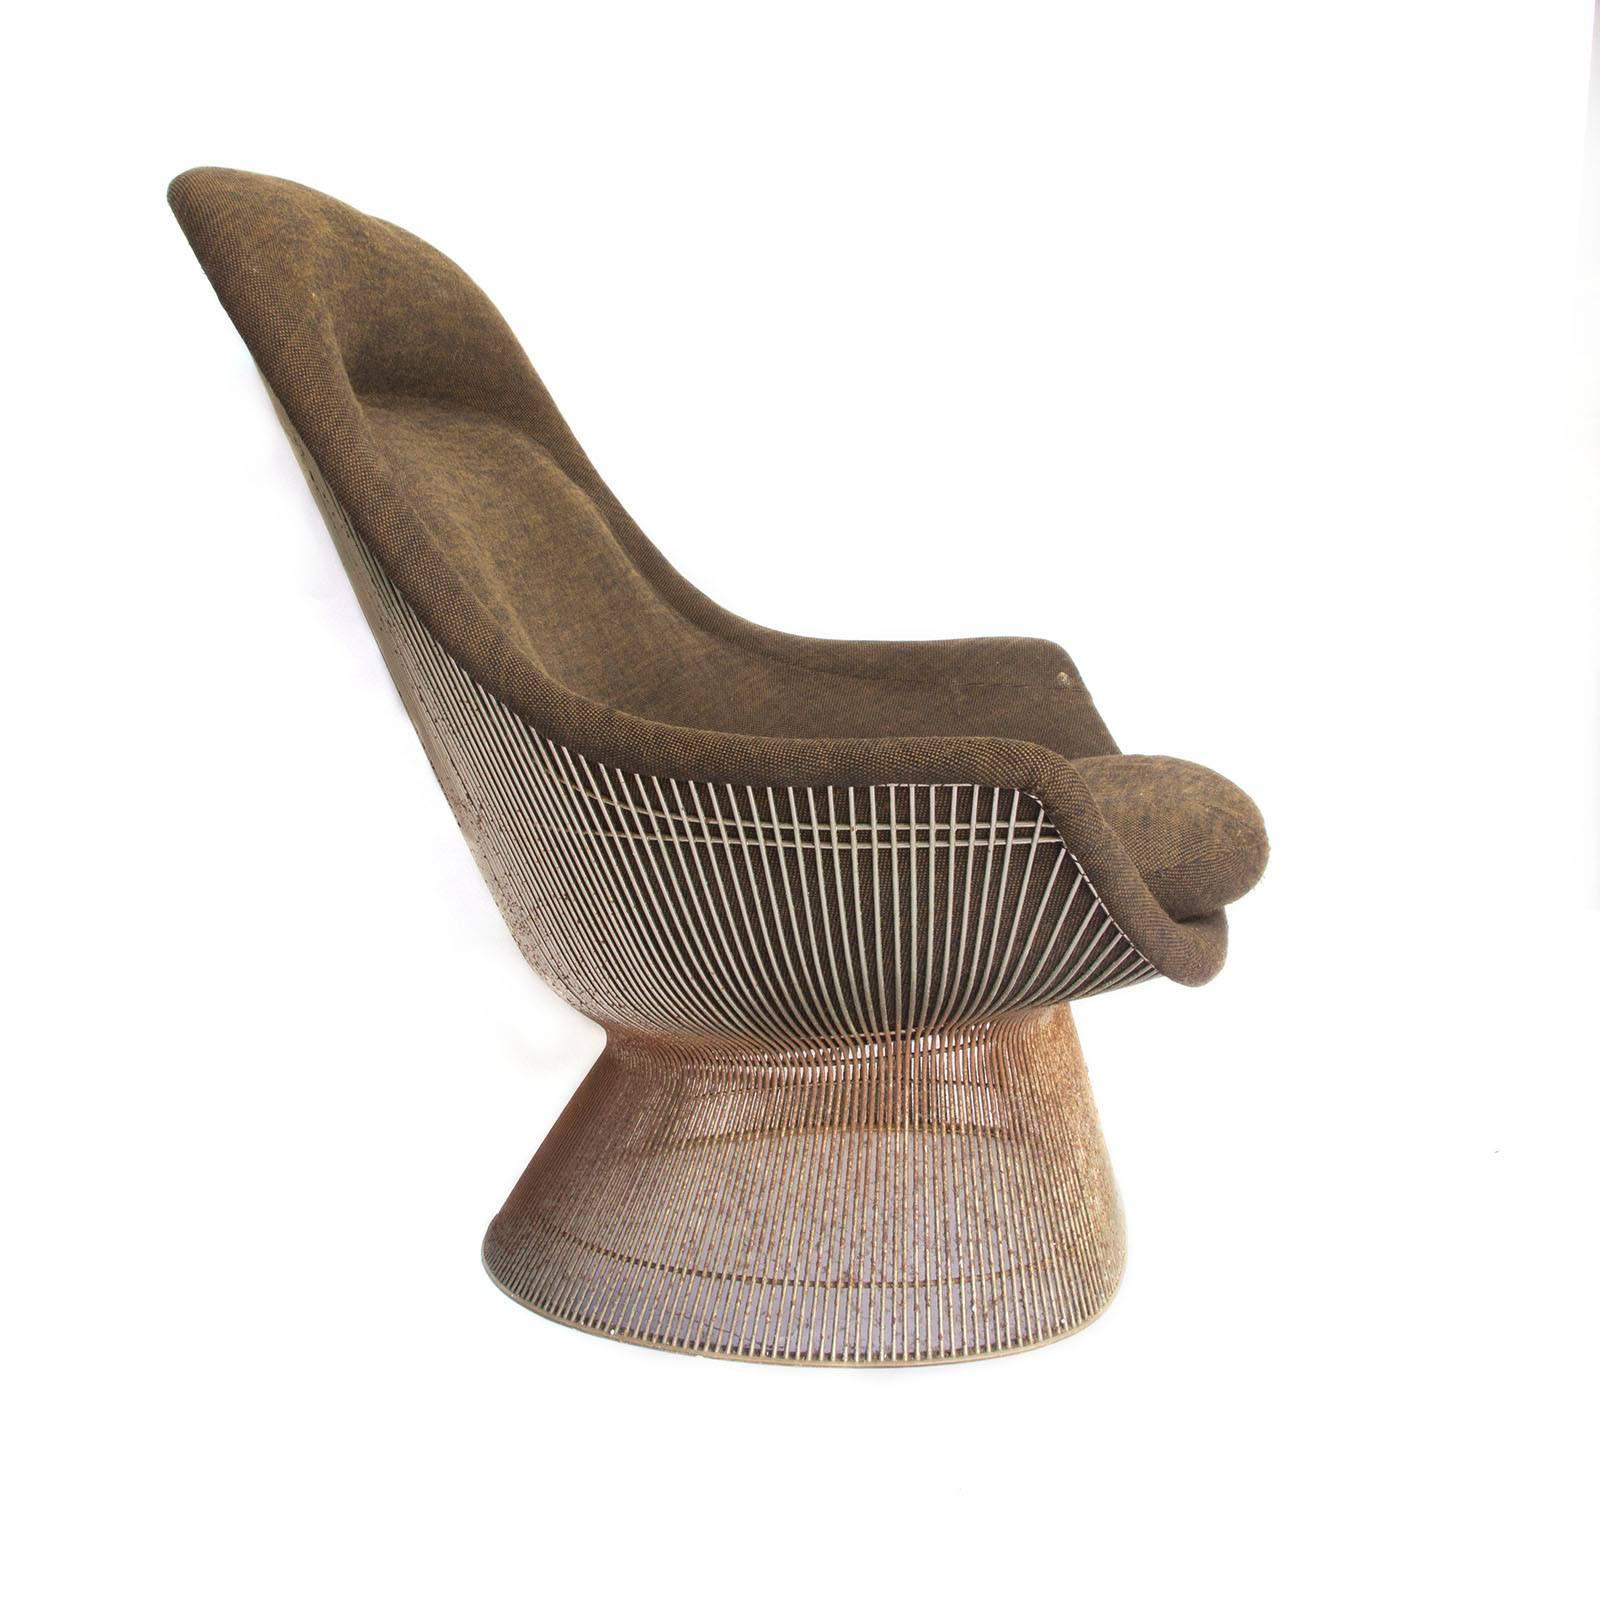 A slightly rusty, which can be removed on request, high back Warren Platner for Knoll International lounge chair first introduced, circa 1966. The Platner range of furniture for Knoll is known for its relatively simple design yet its incredible